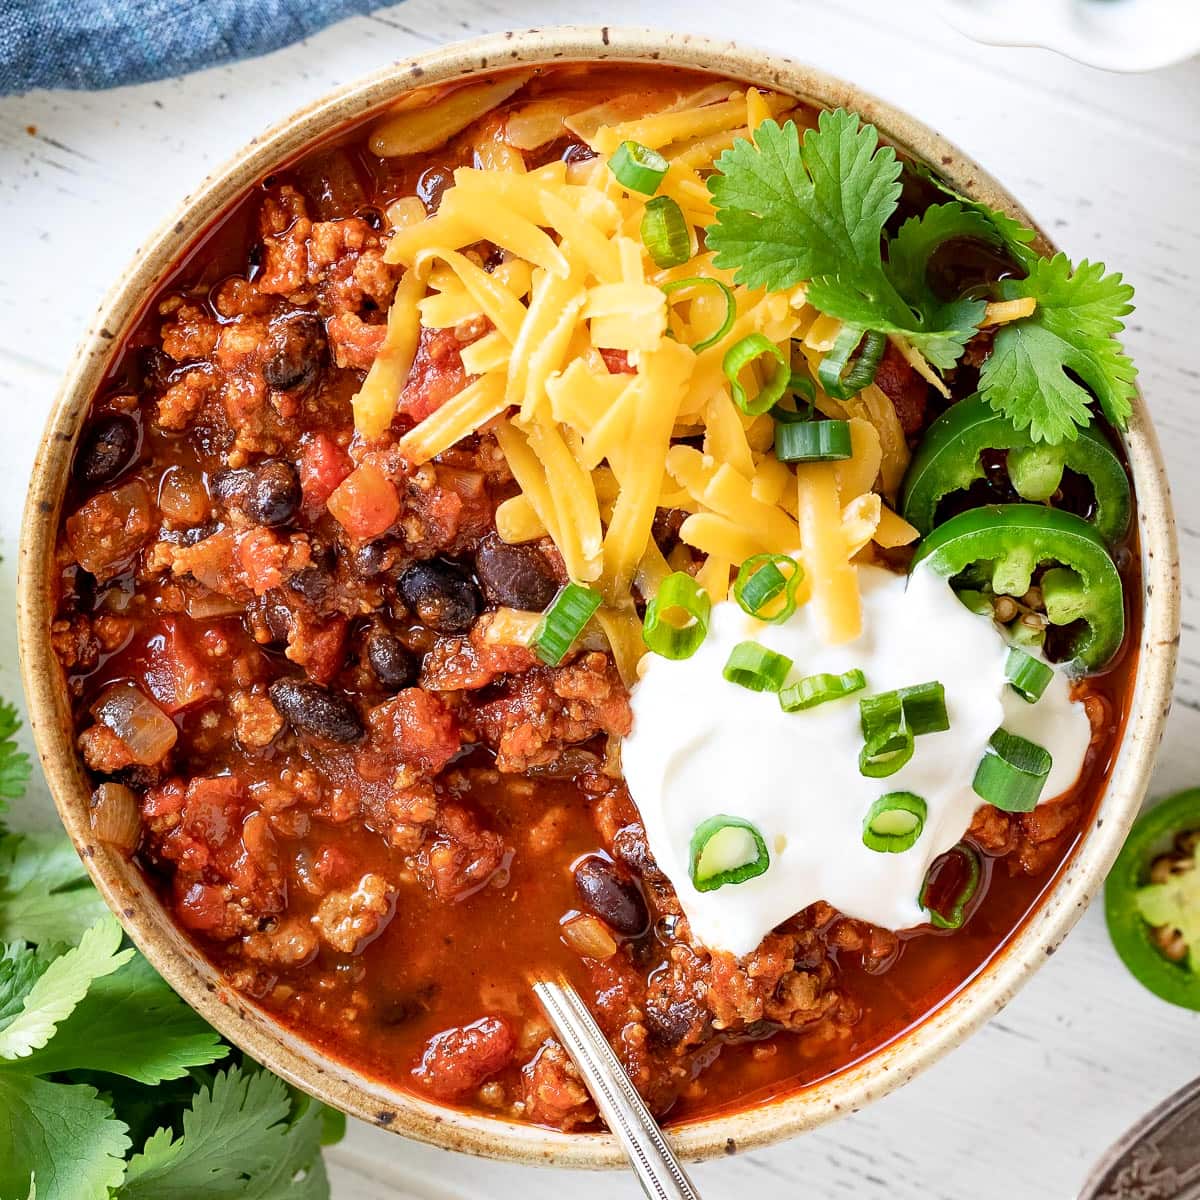 The Best Turkey Chili - Quick and Easy!